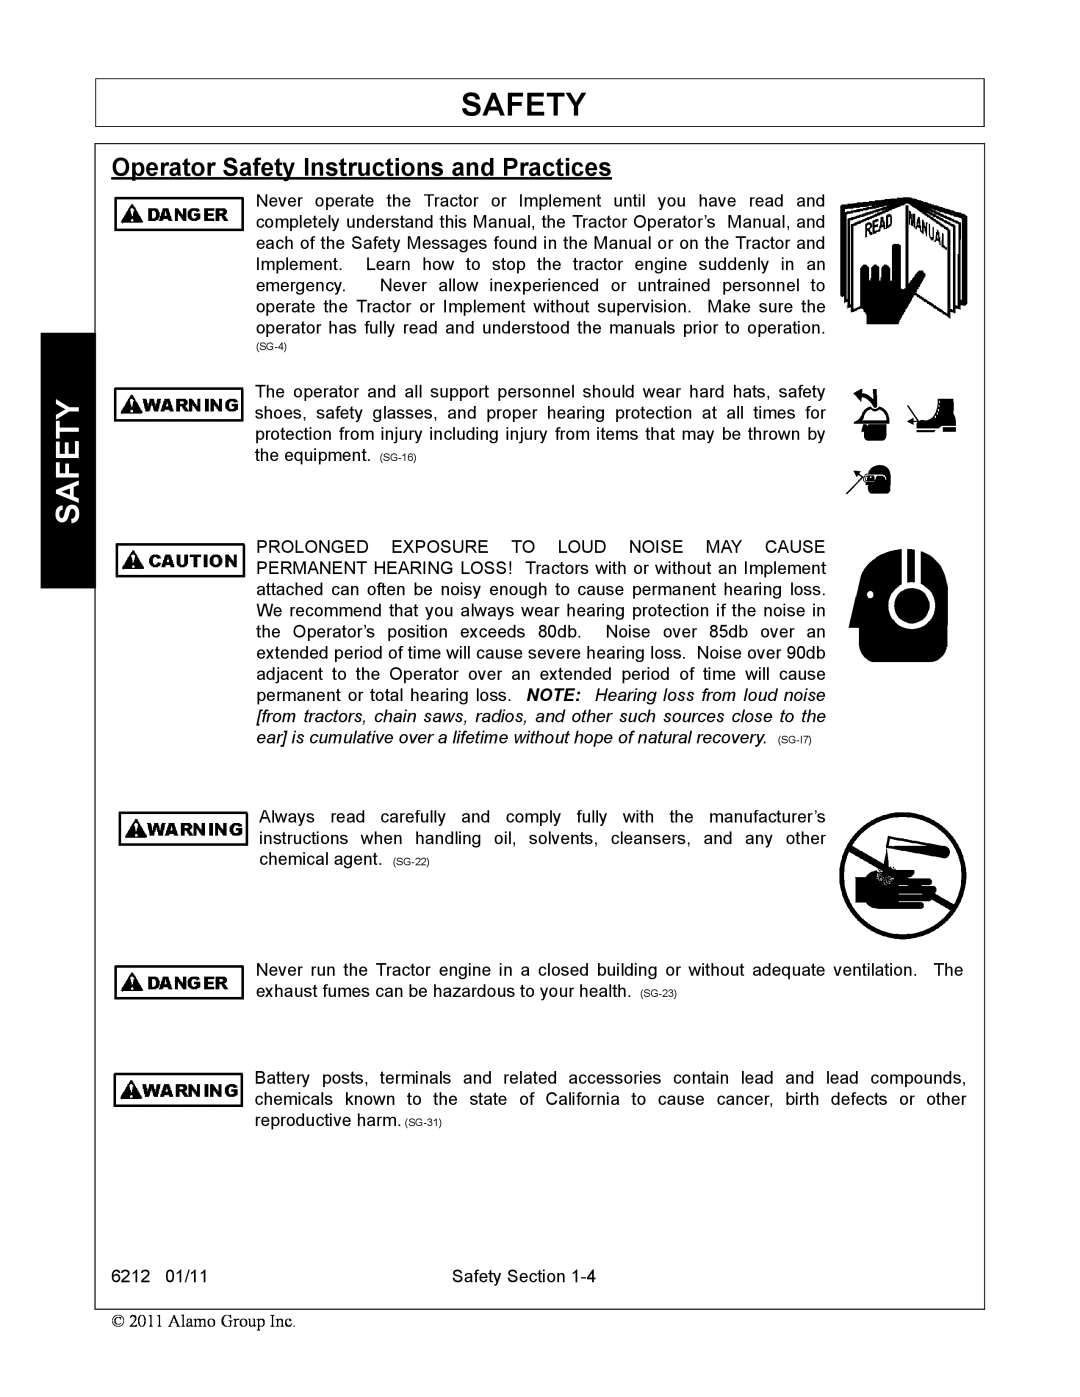 Alamo 6212 manual Operator Safety Instructions and Practices, SG-4 